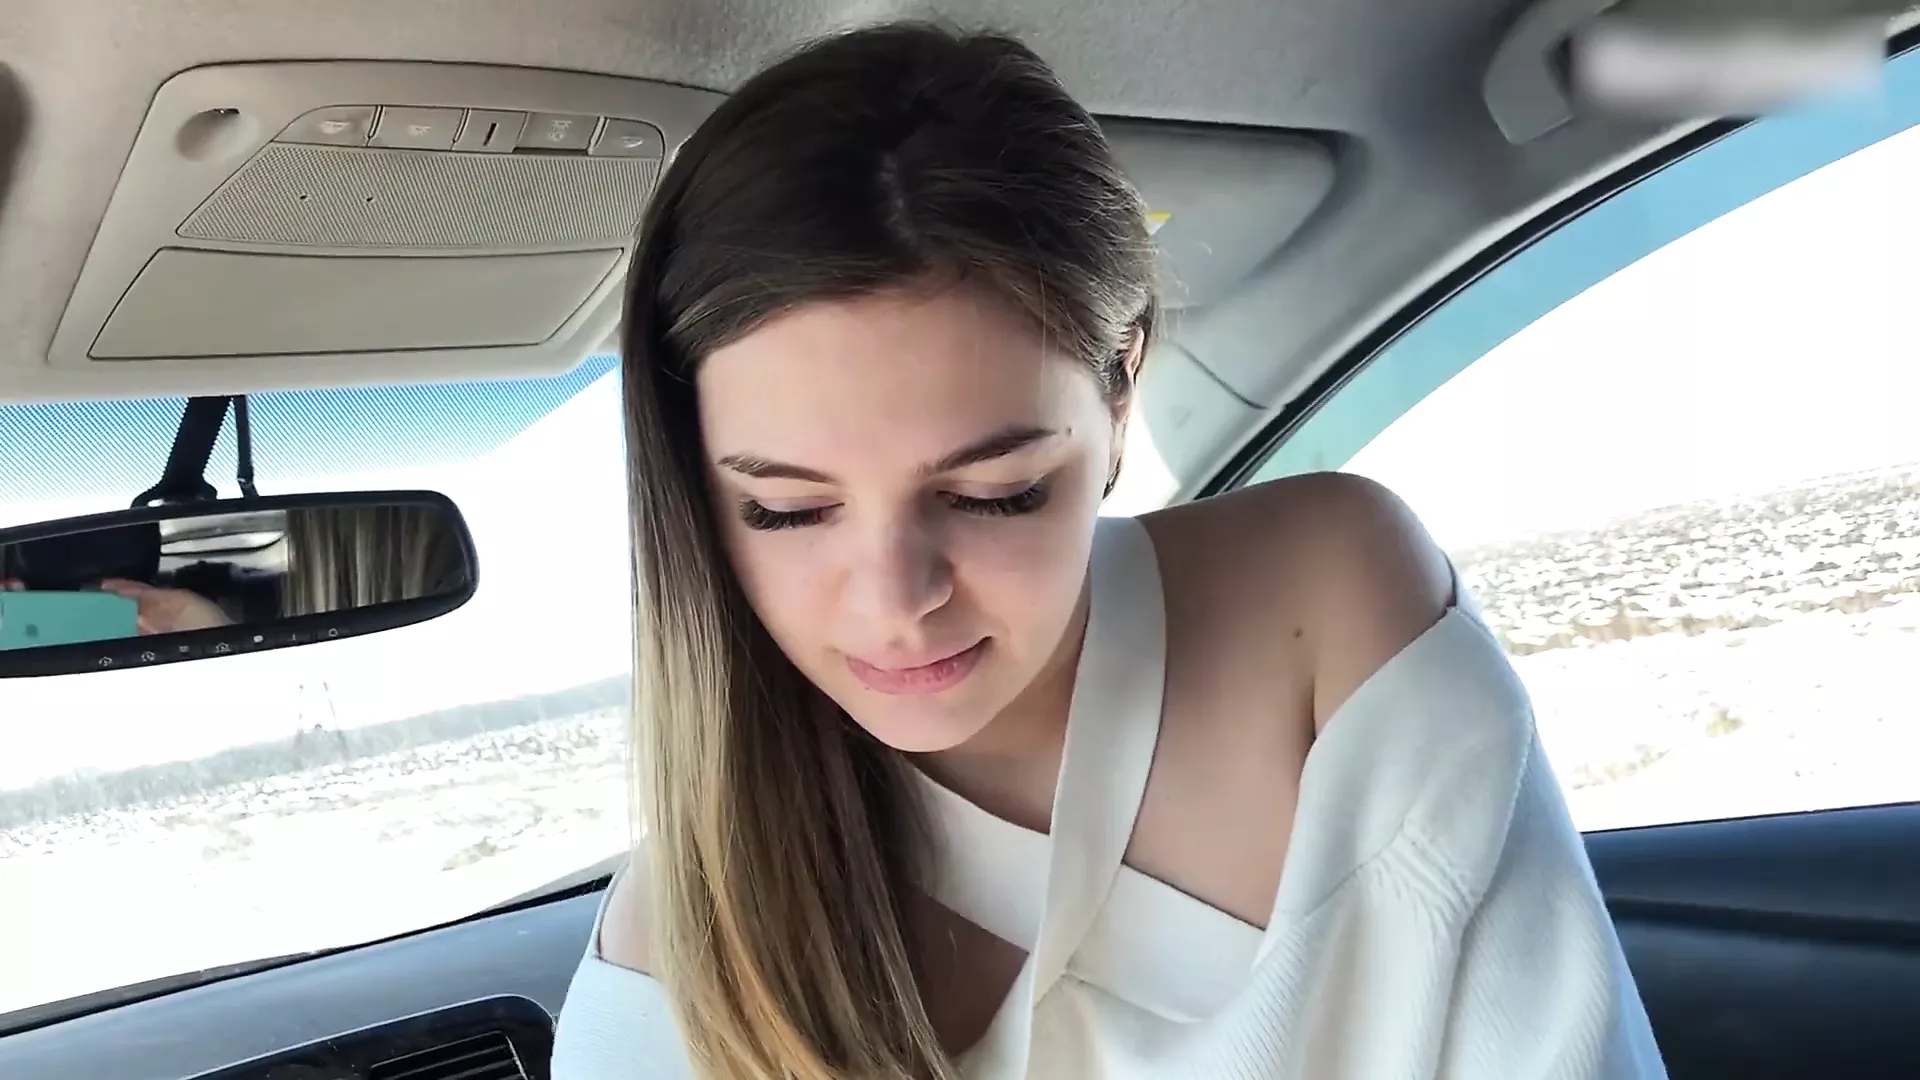 Fucking A Stranger - Fucked a stranger girl in the middle of a field in a car | xHamster